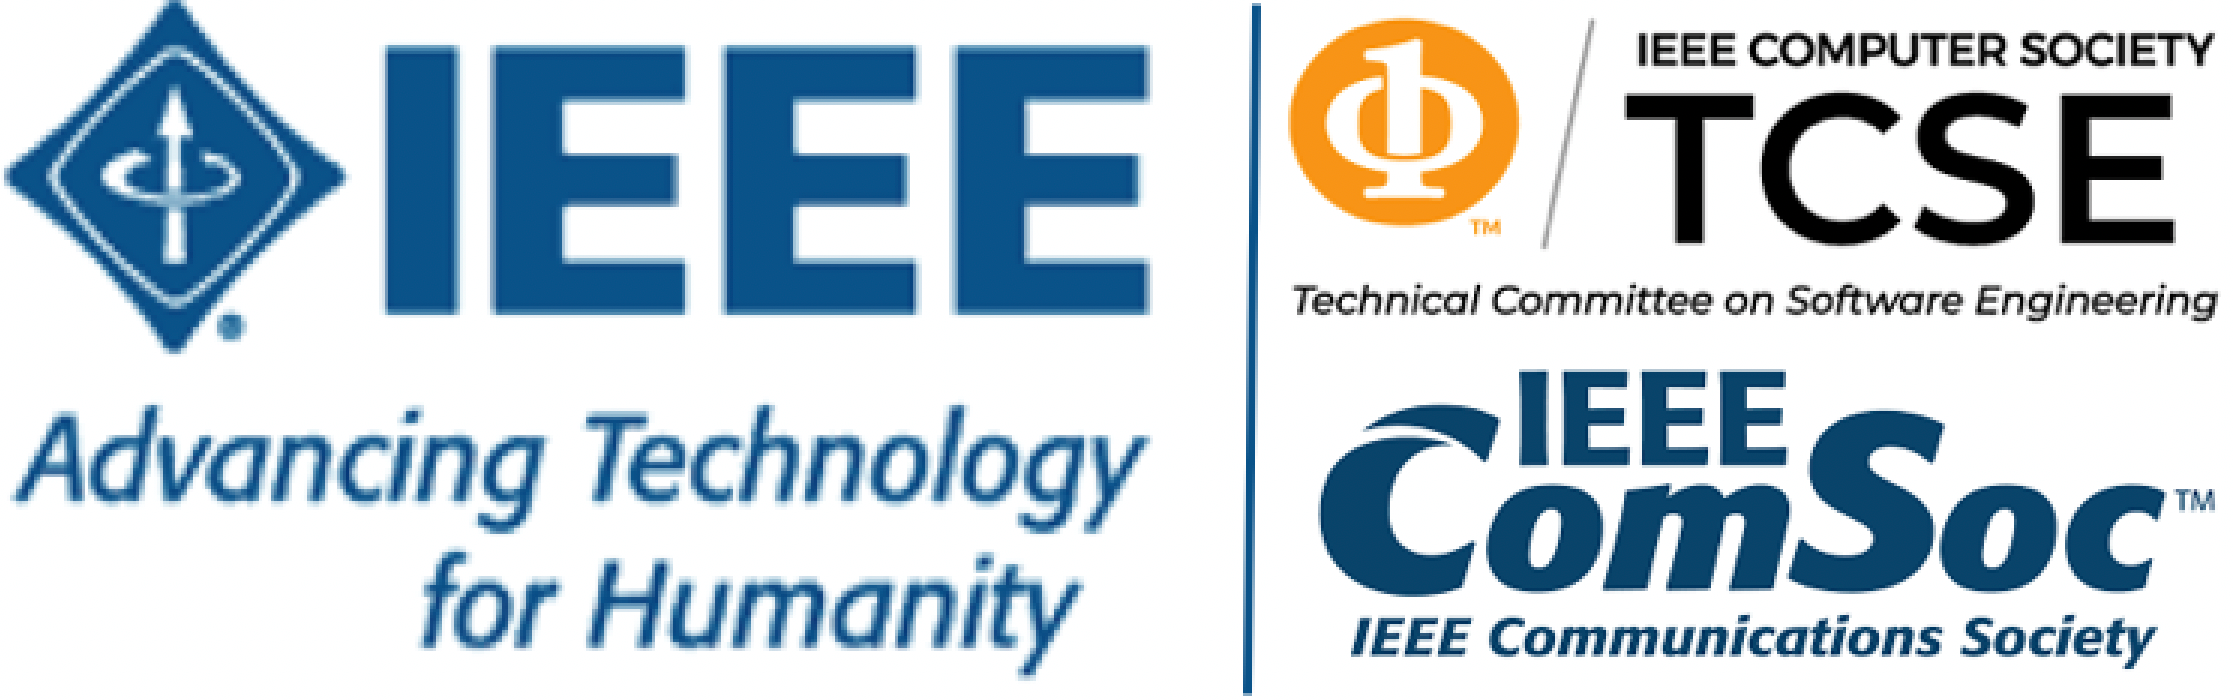 Member: IEEE - Computer Society, Technical Committee on Software Engineering